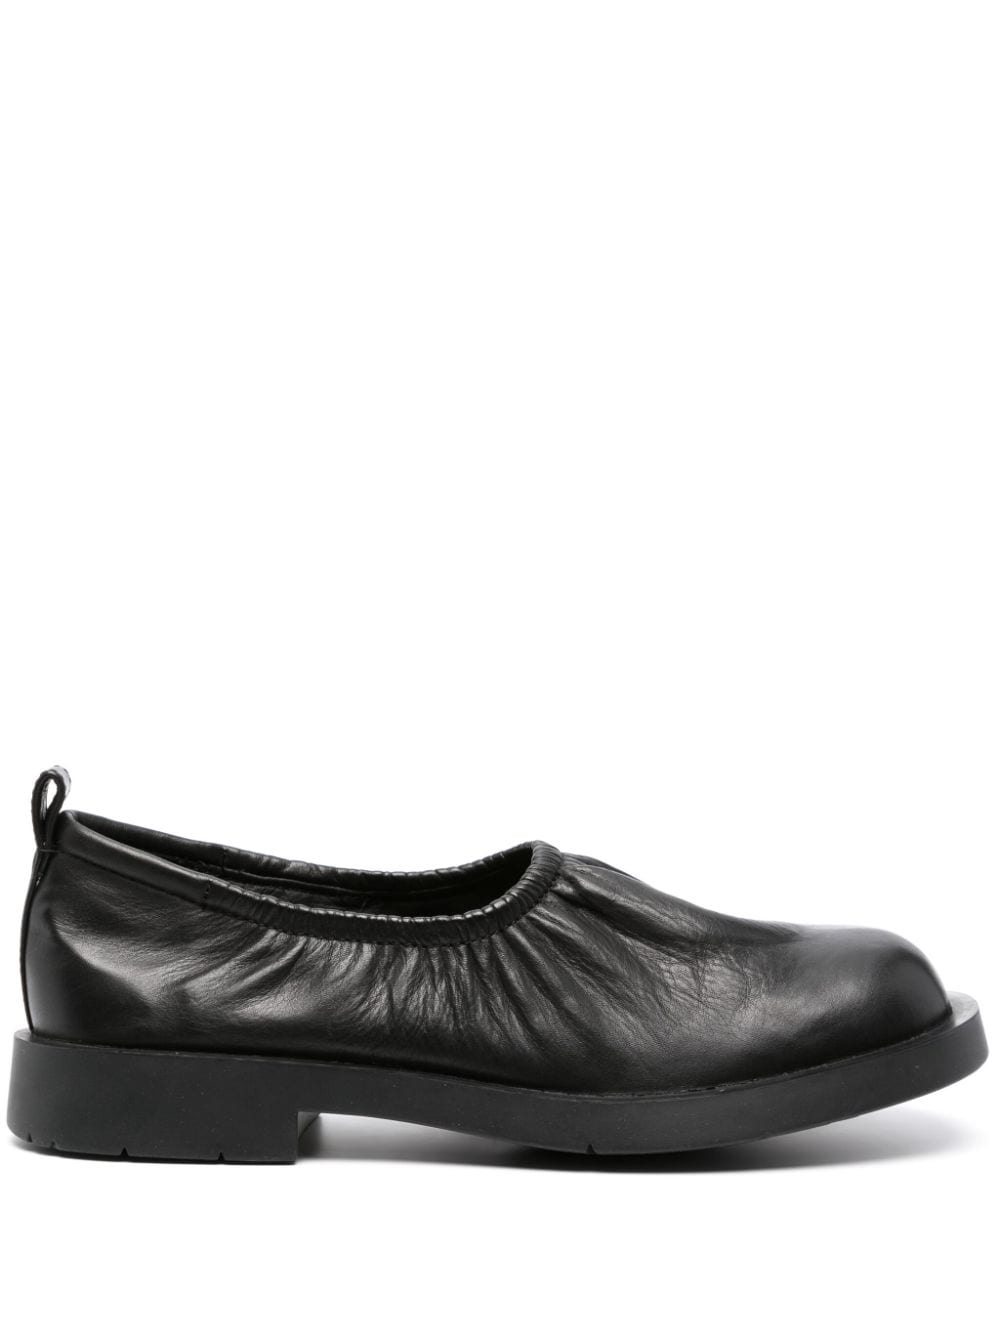 CAMPERLAB Mil 1978 leather loafers | REVERSIBLE